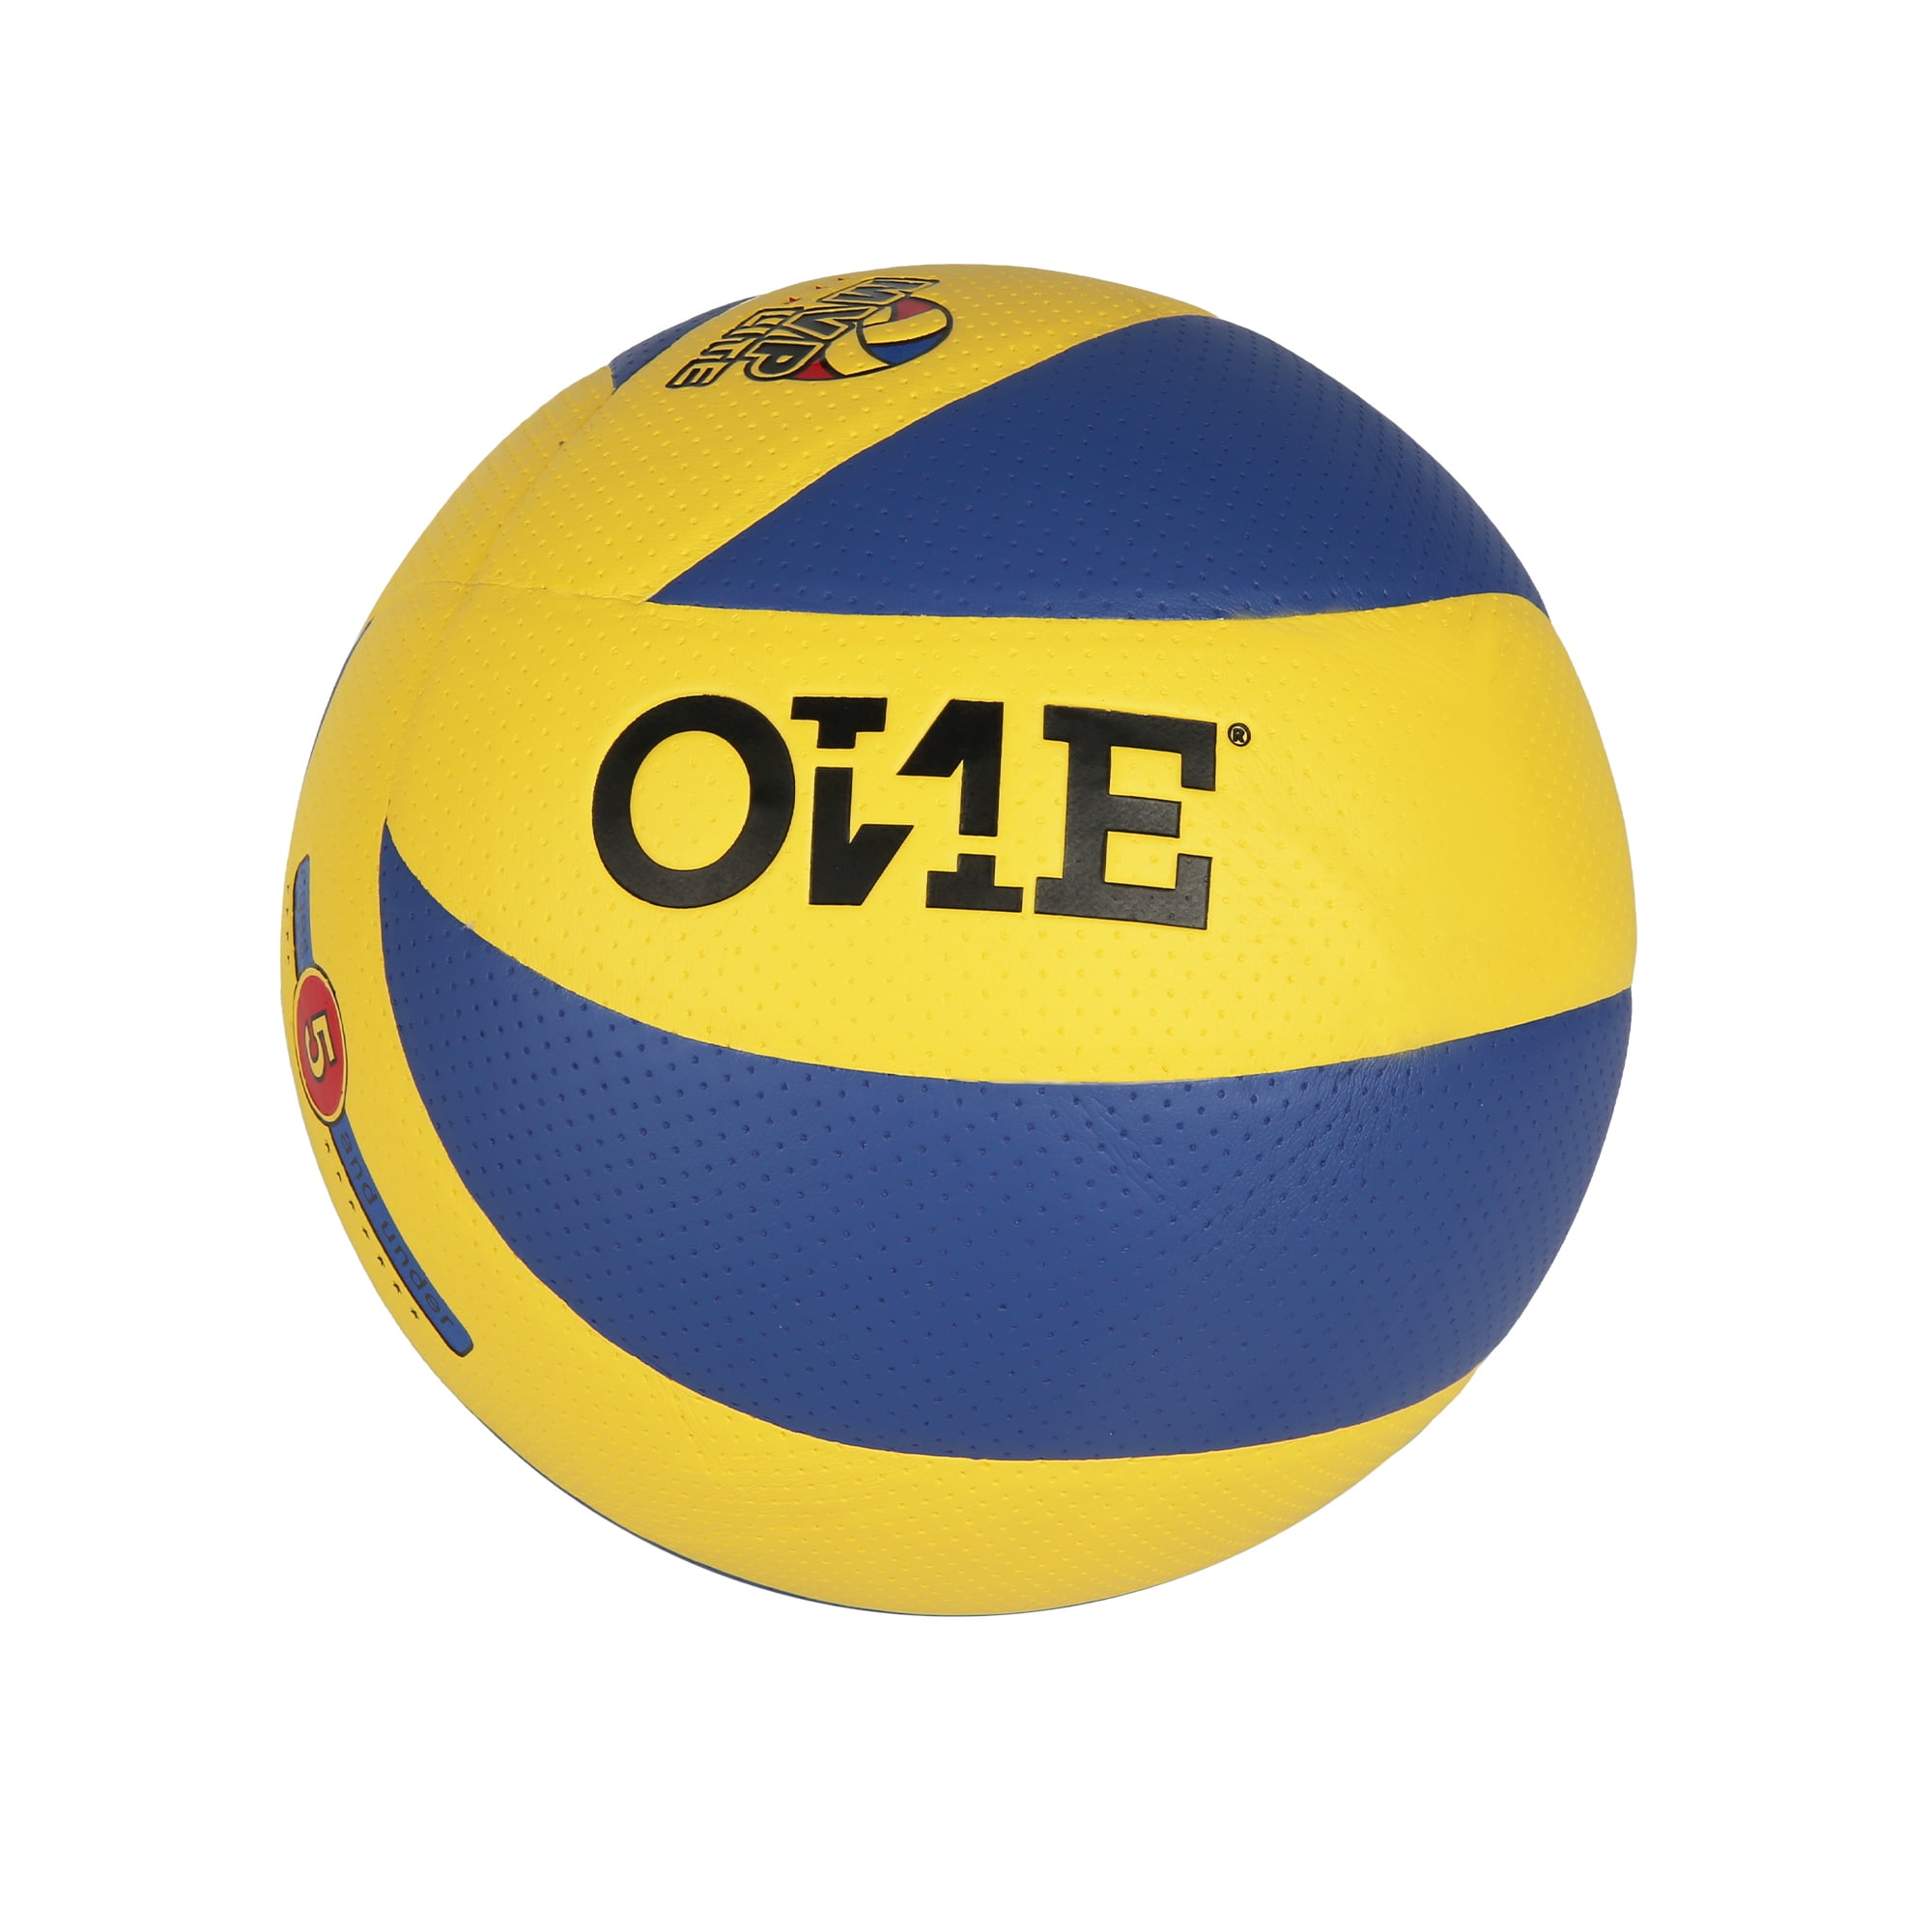 VETRA Volleyball Soft Touch Volley Ball Official Size 5 Outdoor Indoor Beach Gym 